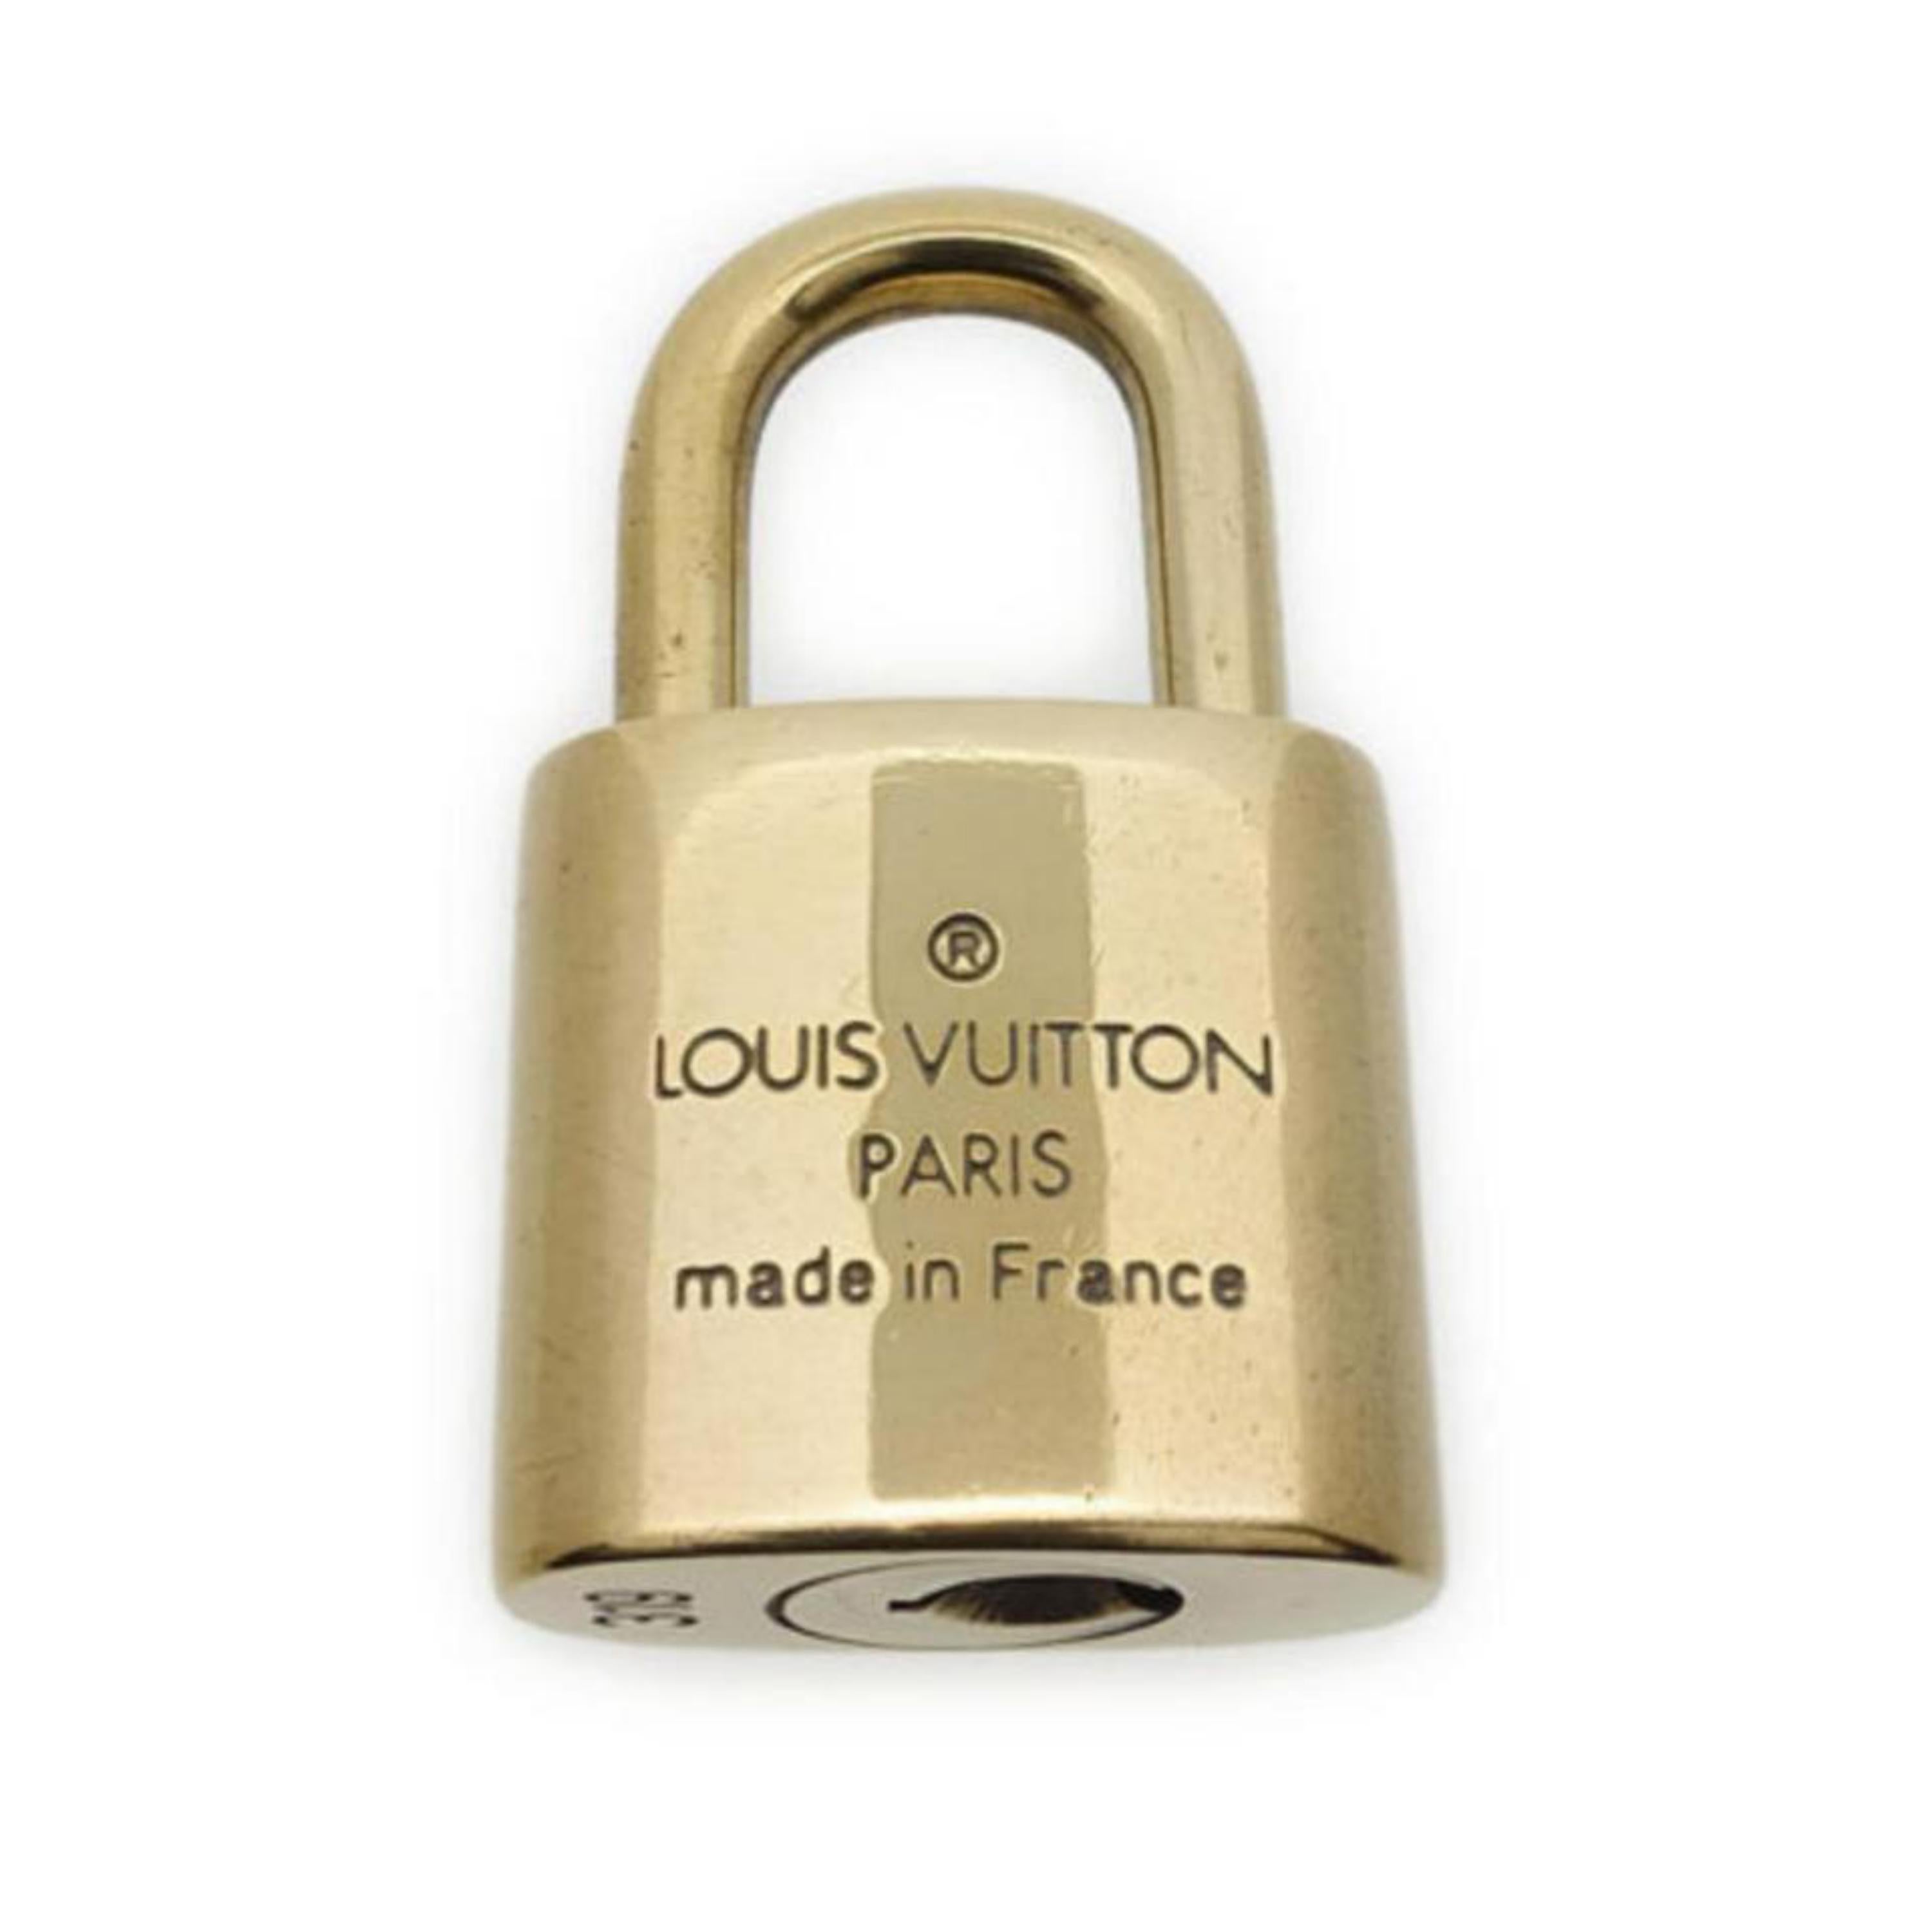 Louis Vuitton Gold Gold Single Key Lock Pad Lock and Key 867741 For Sale 2